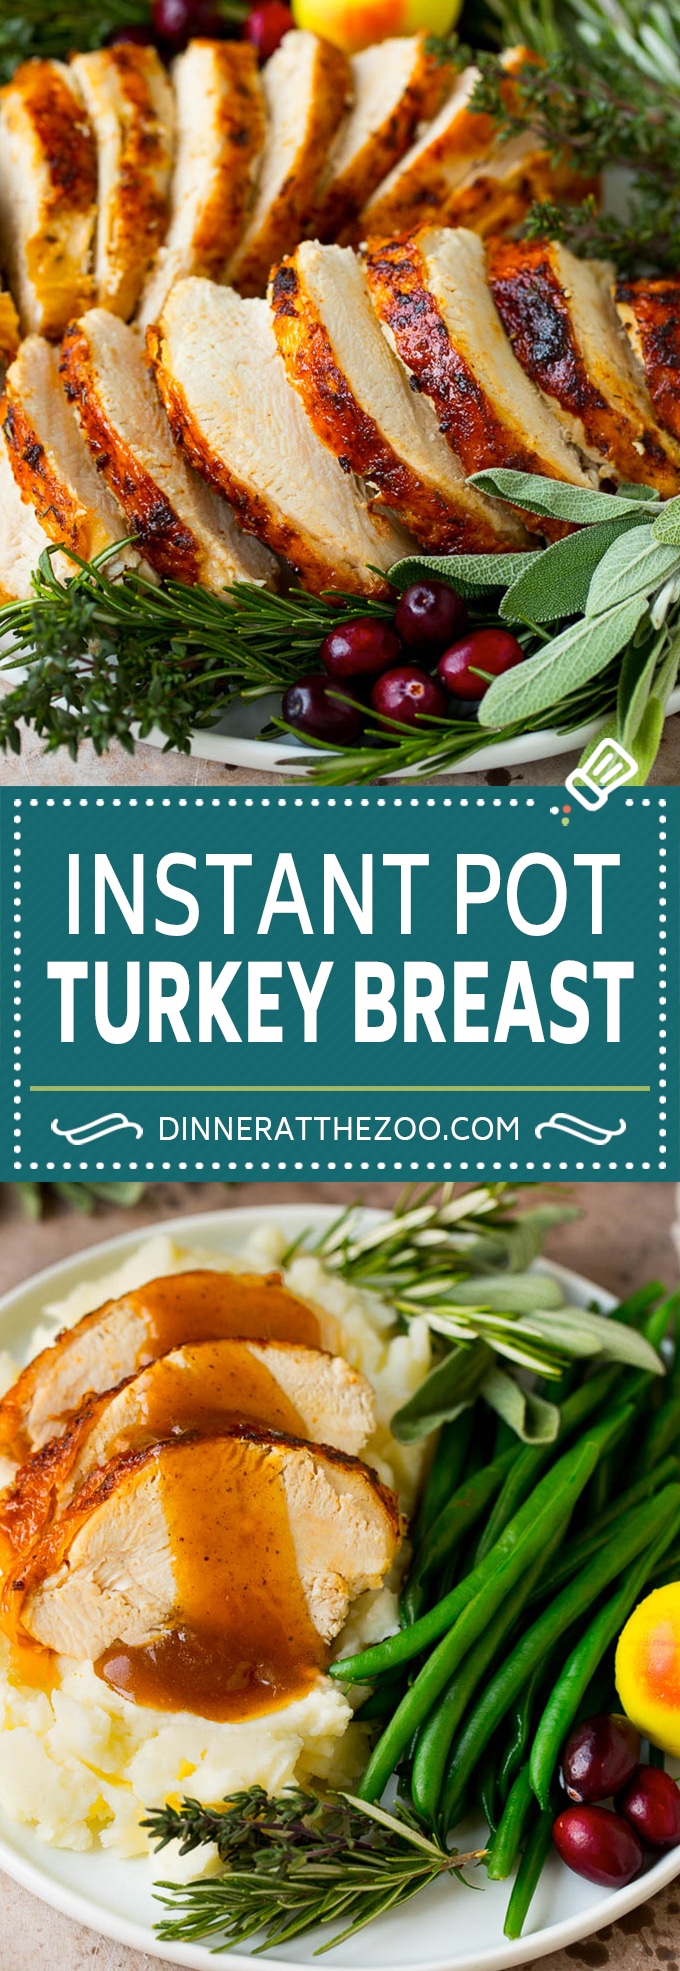 This Instant Pot turkey breast is seasoned with butter, garlic and herbs, then pressure cooked to tender and juicy perfection.